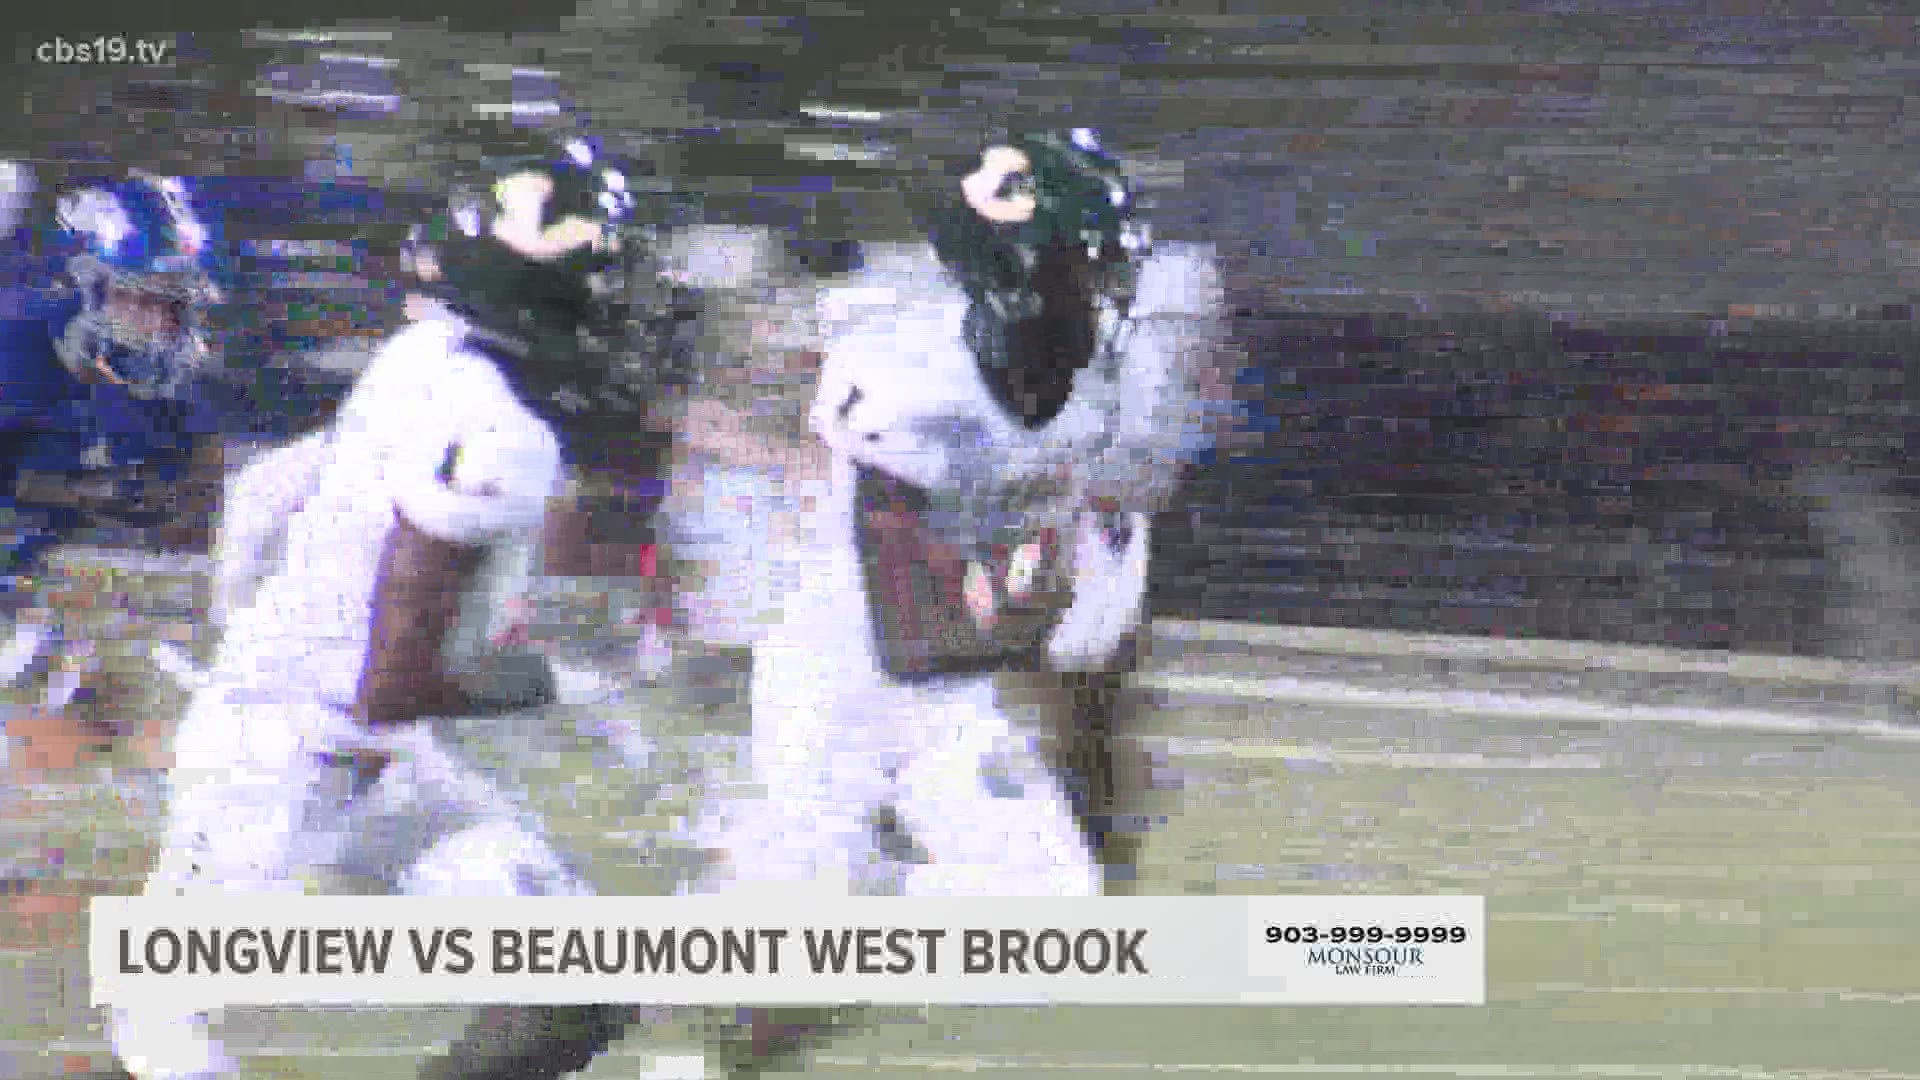 The Longview Lobos traveled to Lufkin's Abe Martin Stadium to take on the Beaumont West Brook Bruins in a rematch of the 2018 state title game.